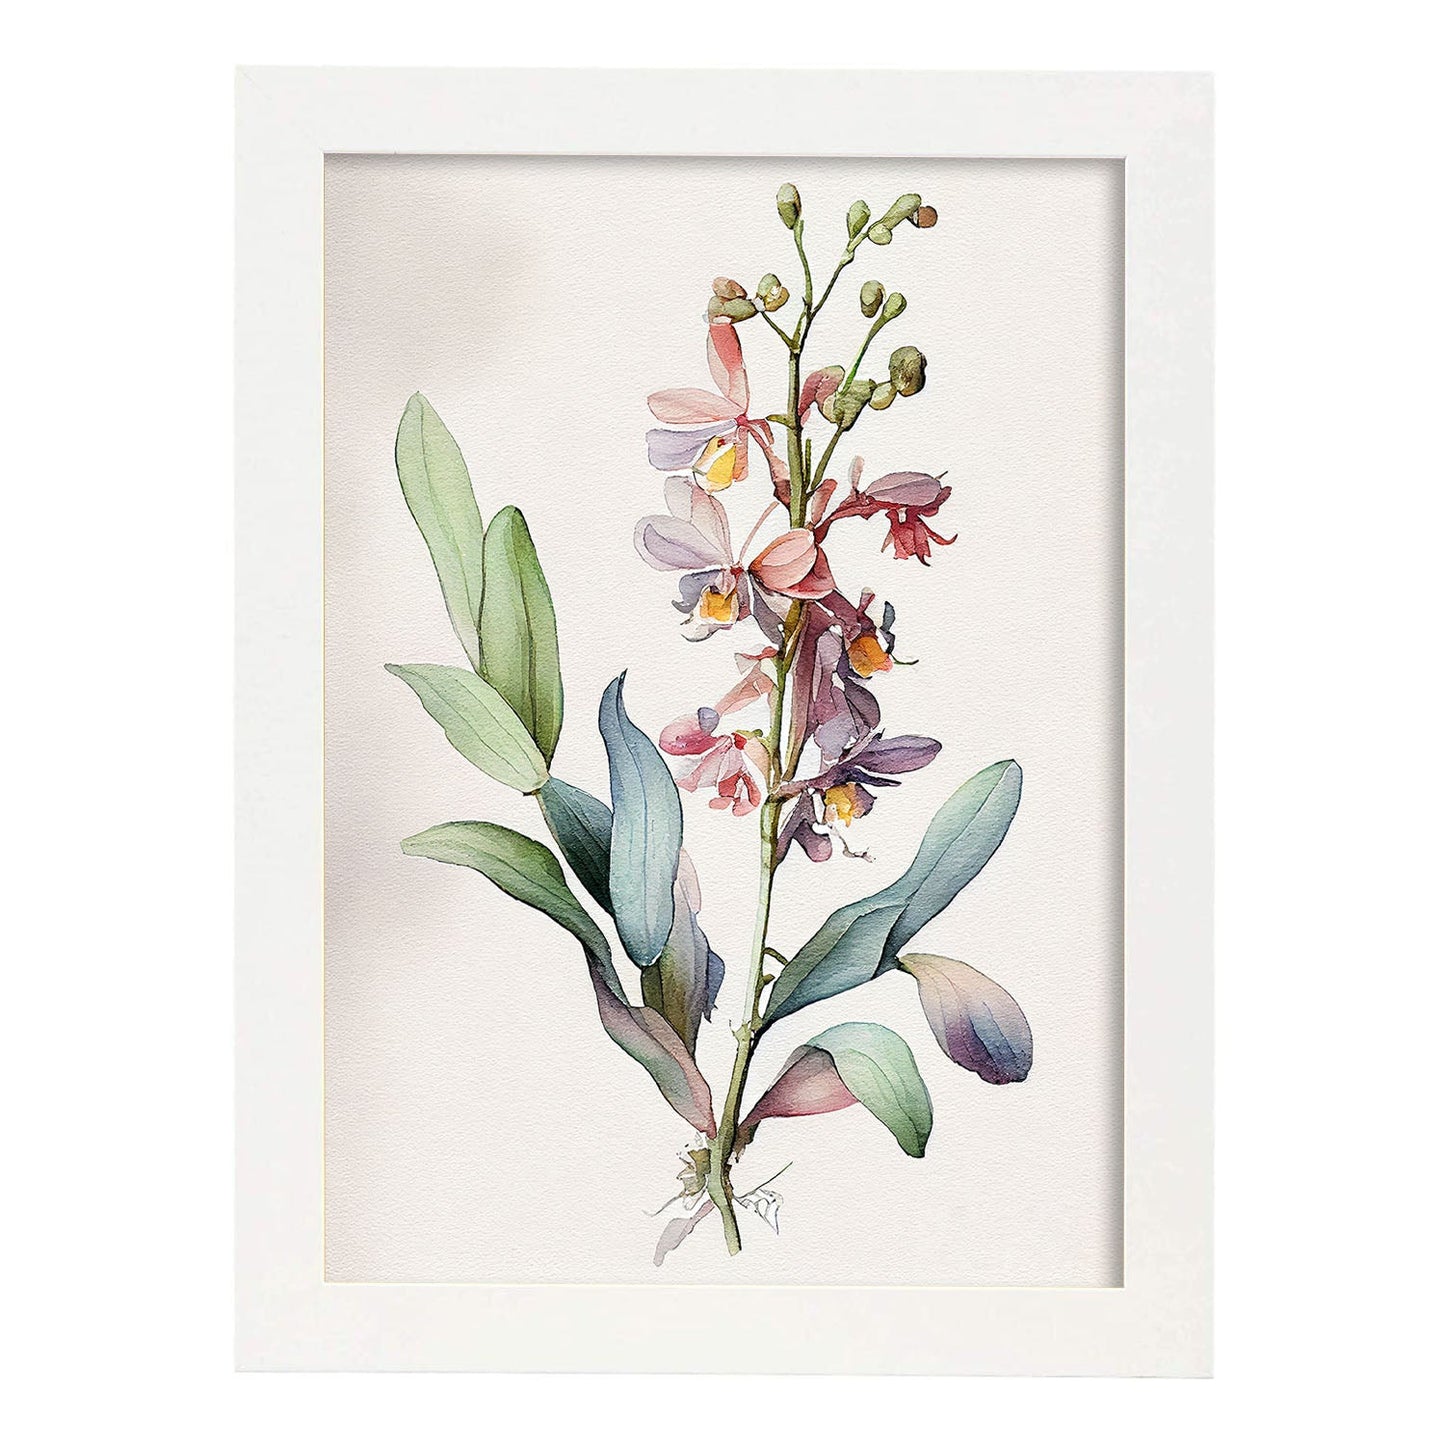 Nacnic watercolor minmal Orchid_3. Aesthetic Wall Art Prints for Bedroom or Living Room Design.-Artwork-Nacnic-A4-Marco Blanco-Nacnic Estudio SL